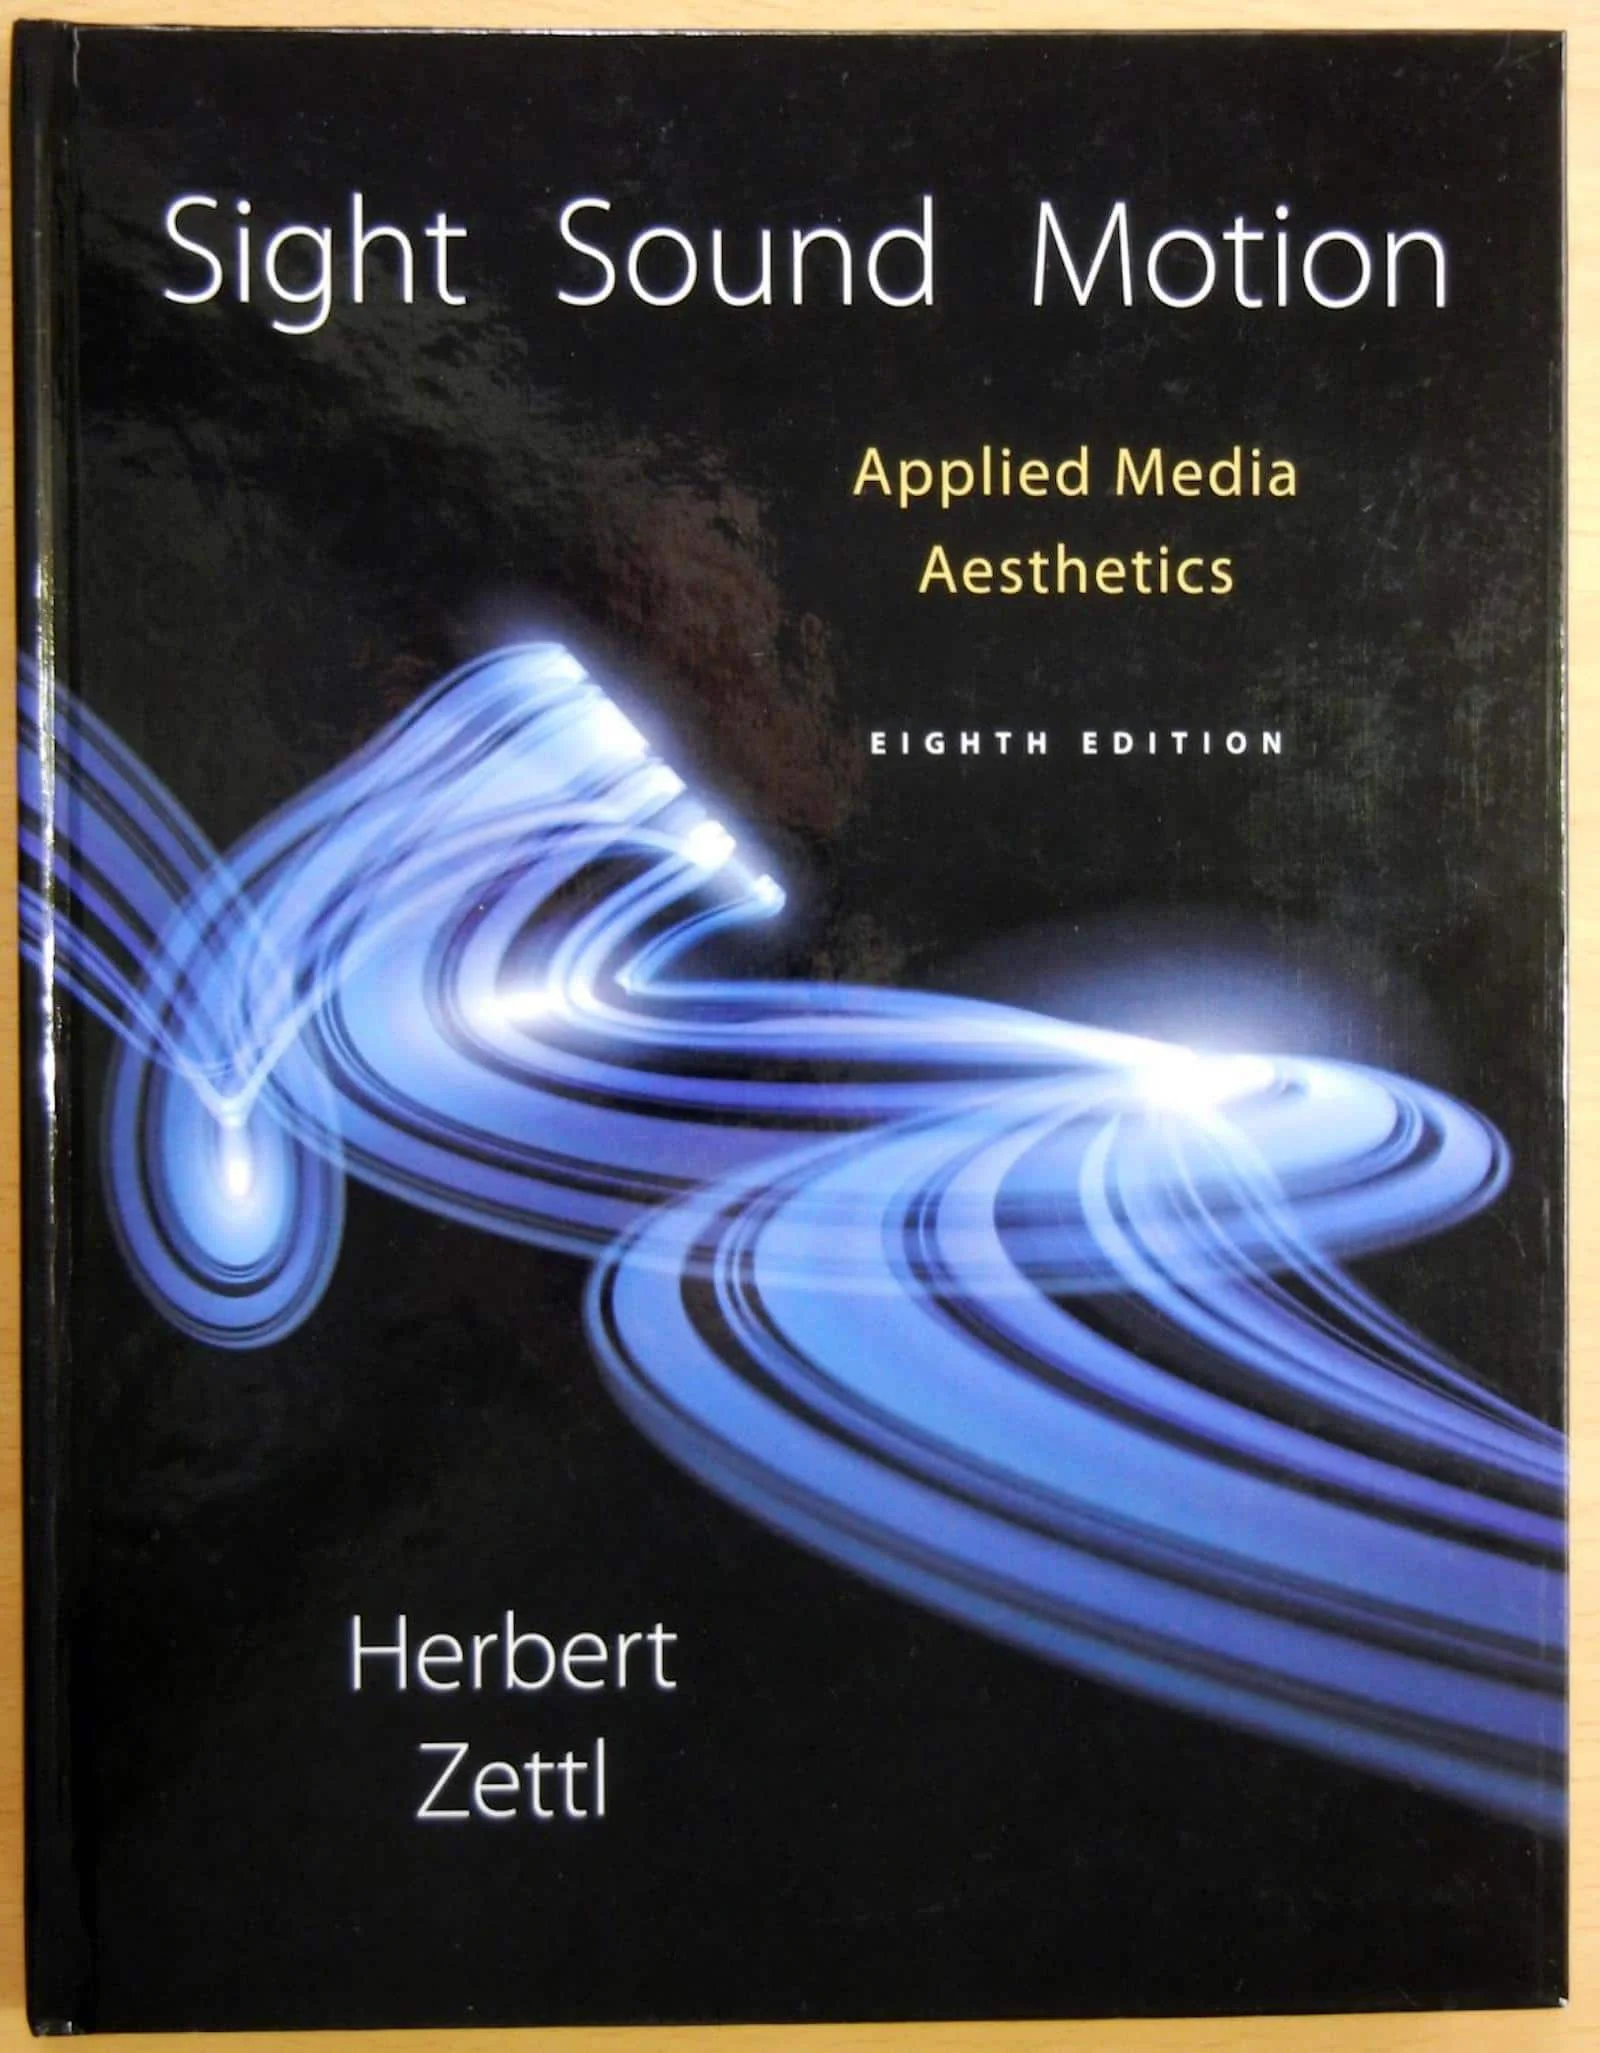 Essential Cinematography Books - Sight Sound Motion